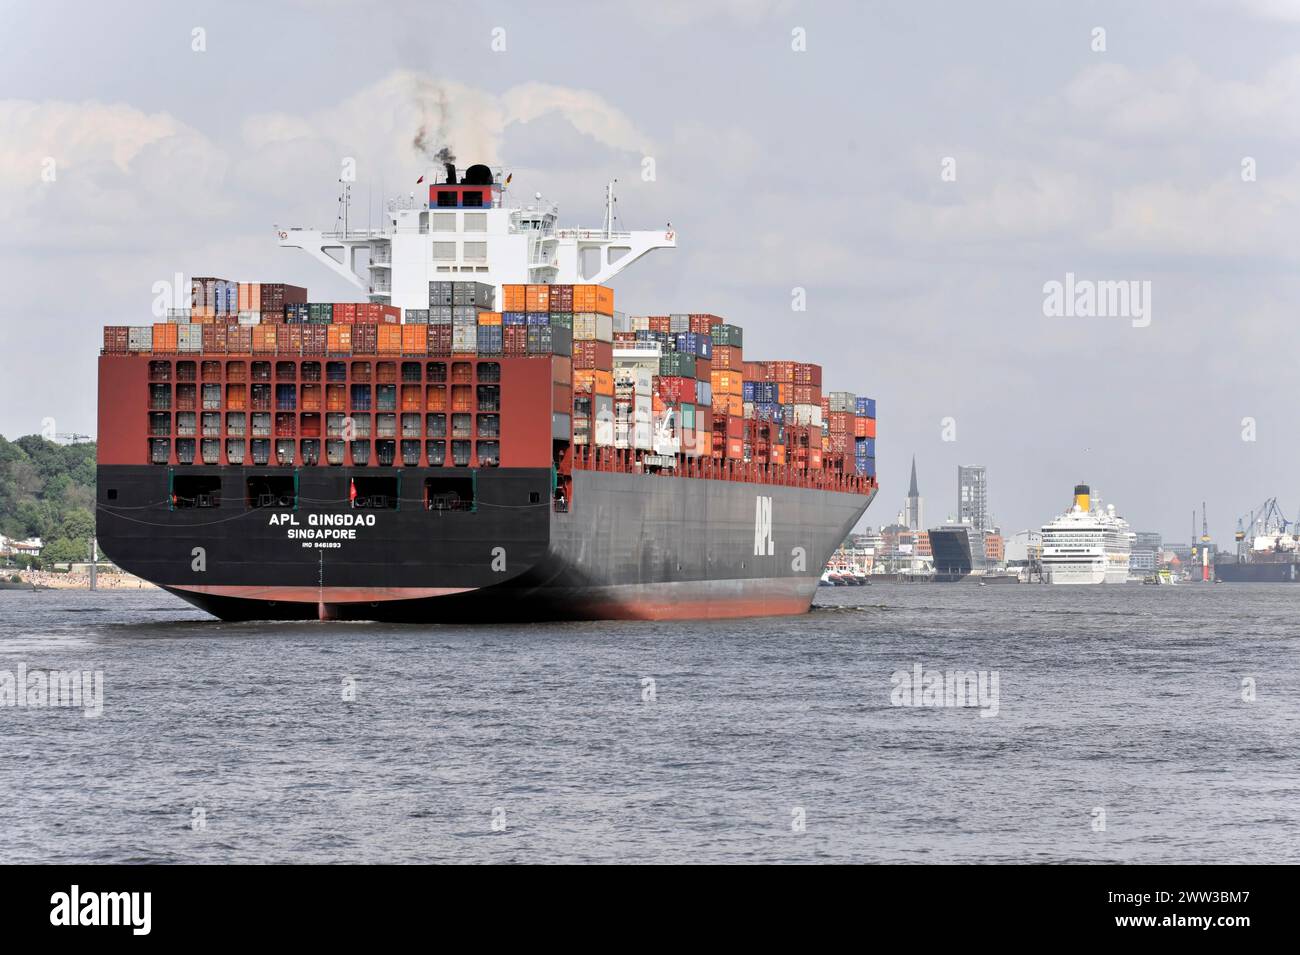 APL QINGDAO, Container ship on the river Elbe with full cargo load under cloudy sky passes by, Hamburg, Hanseatic City, Germany Stock Photo